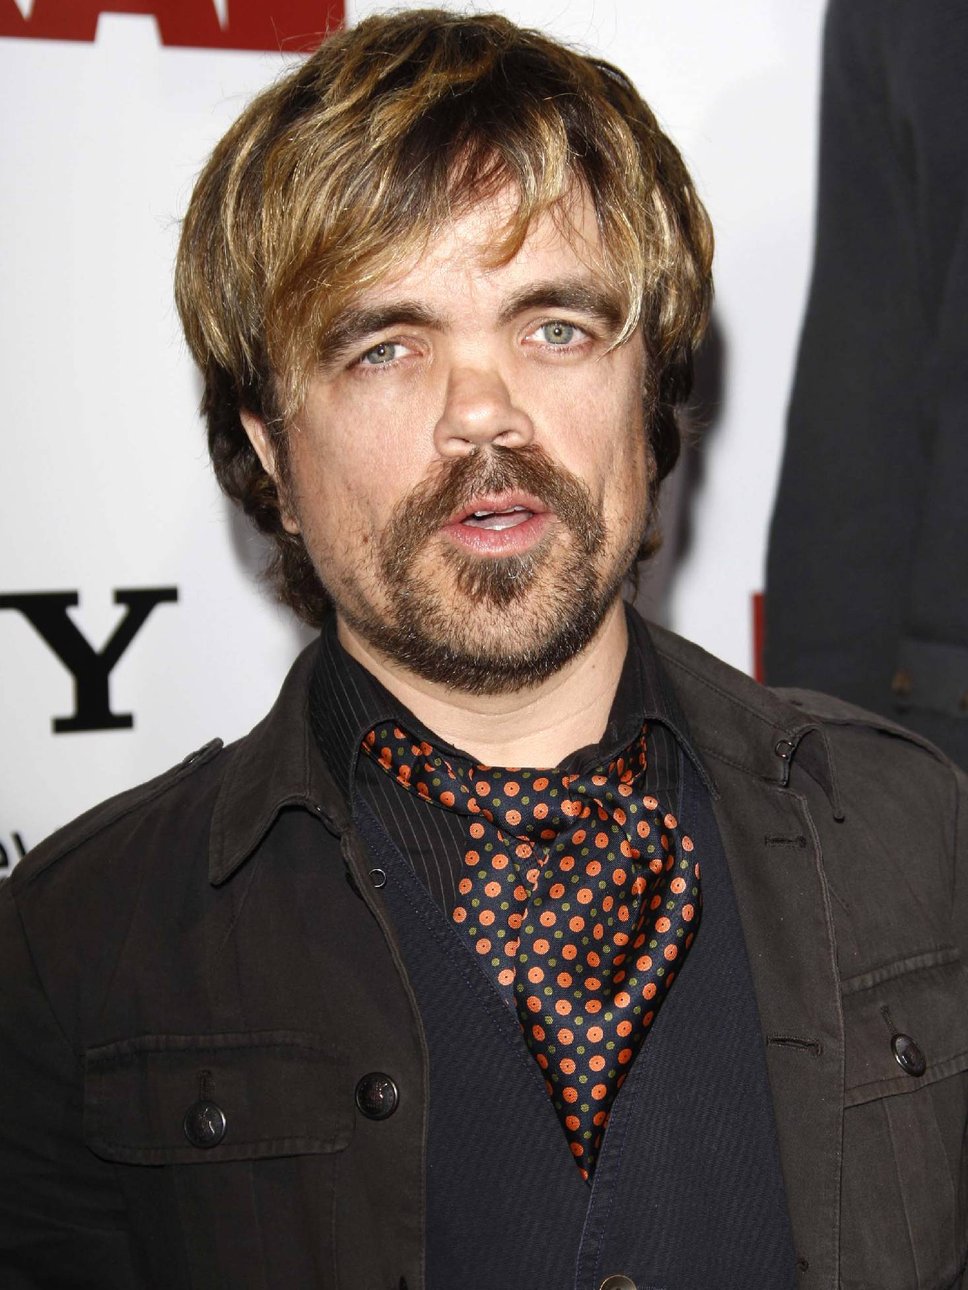 Peter Dinklage HairStyle (Men HairStyles) - Men Hair Styles Collection